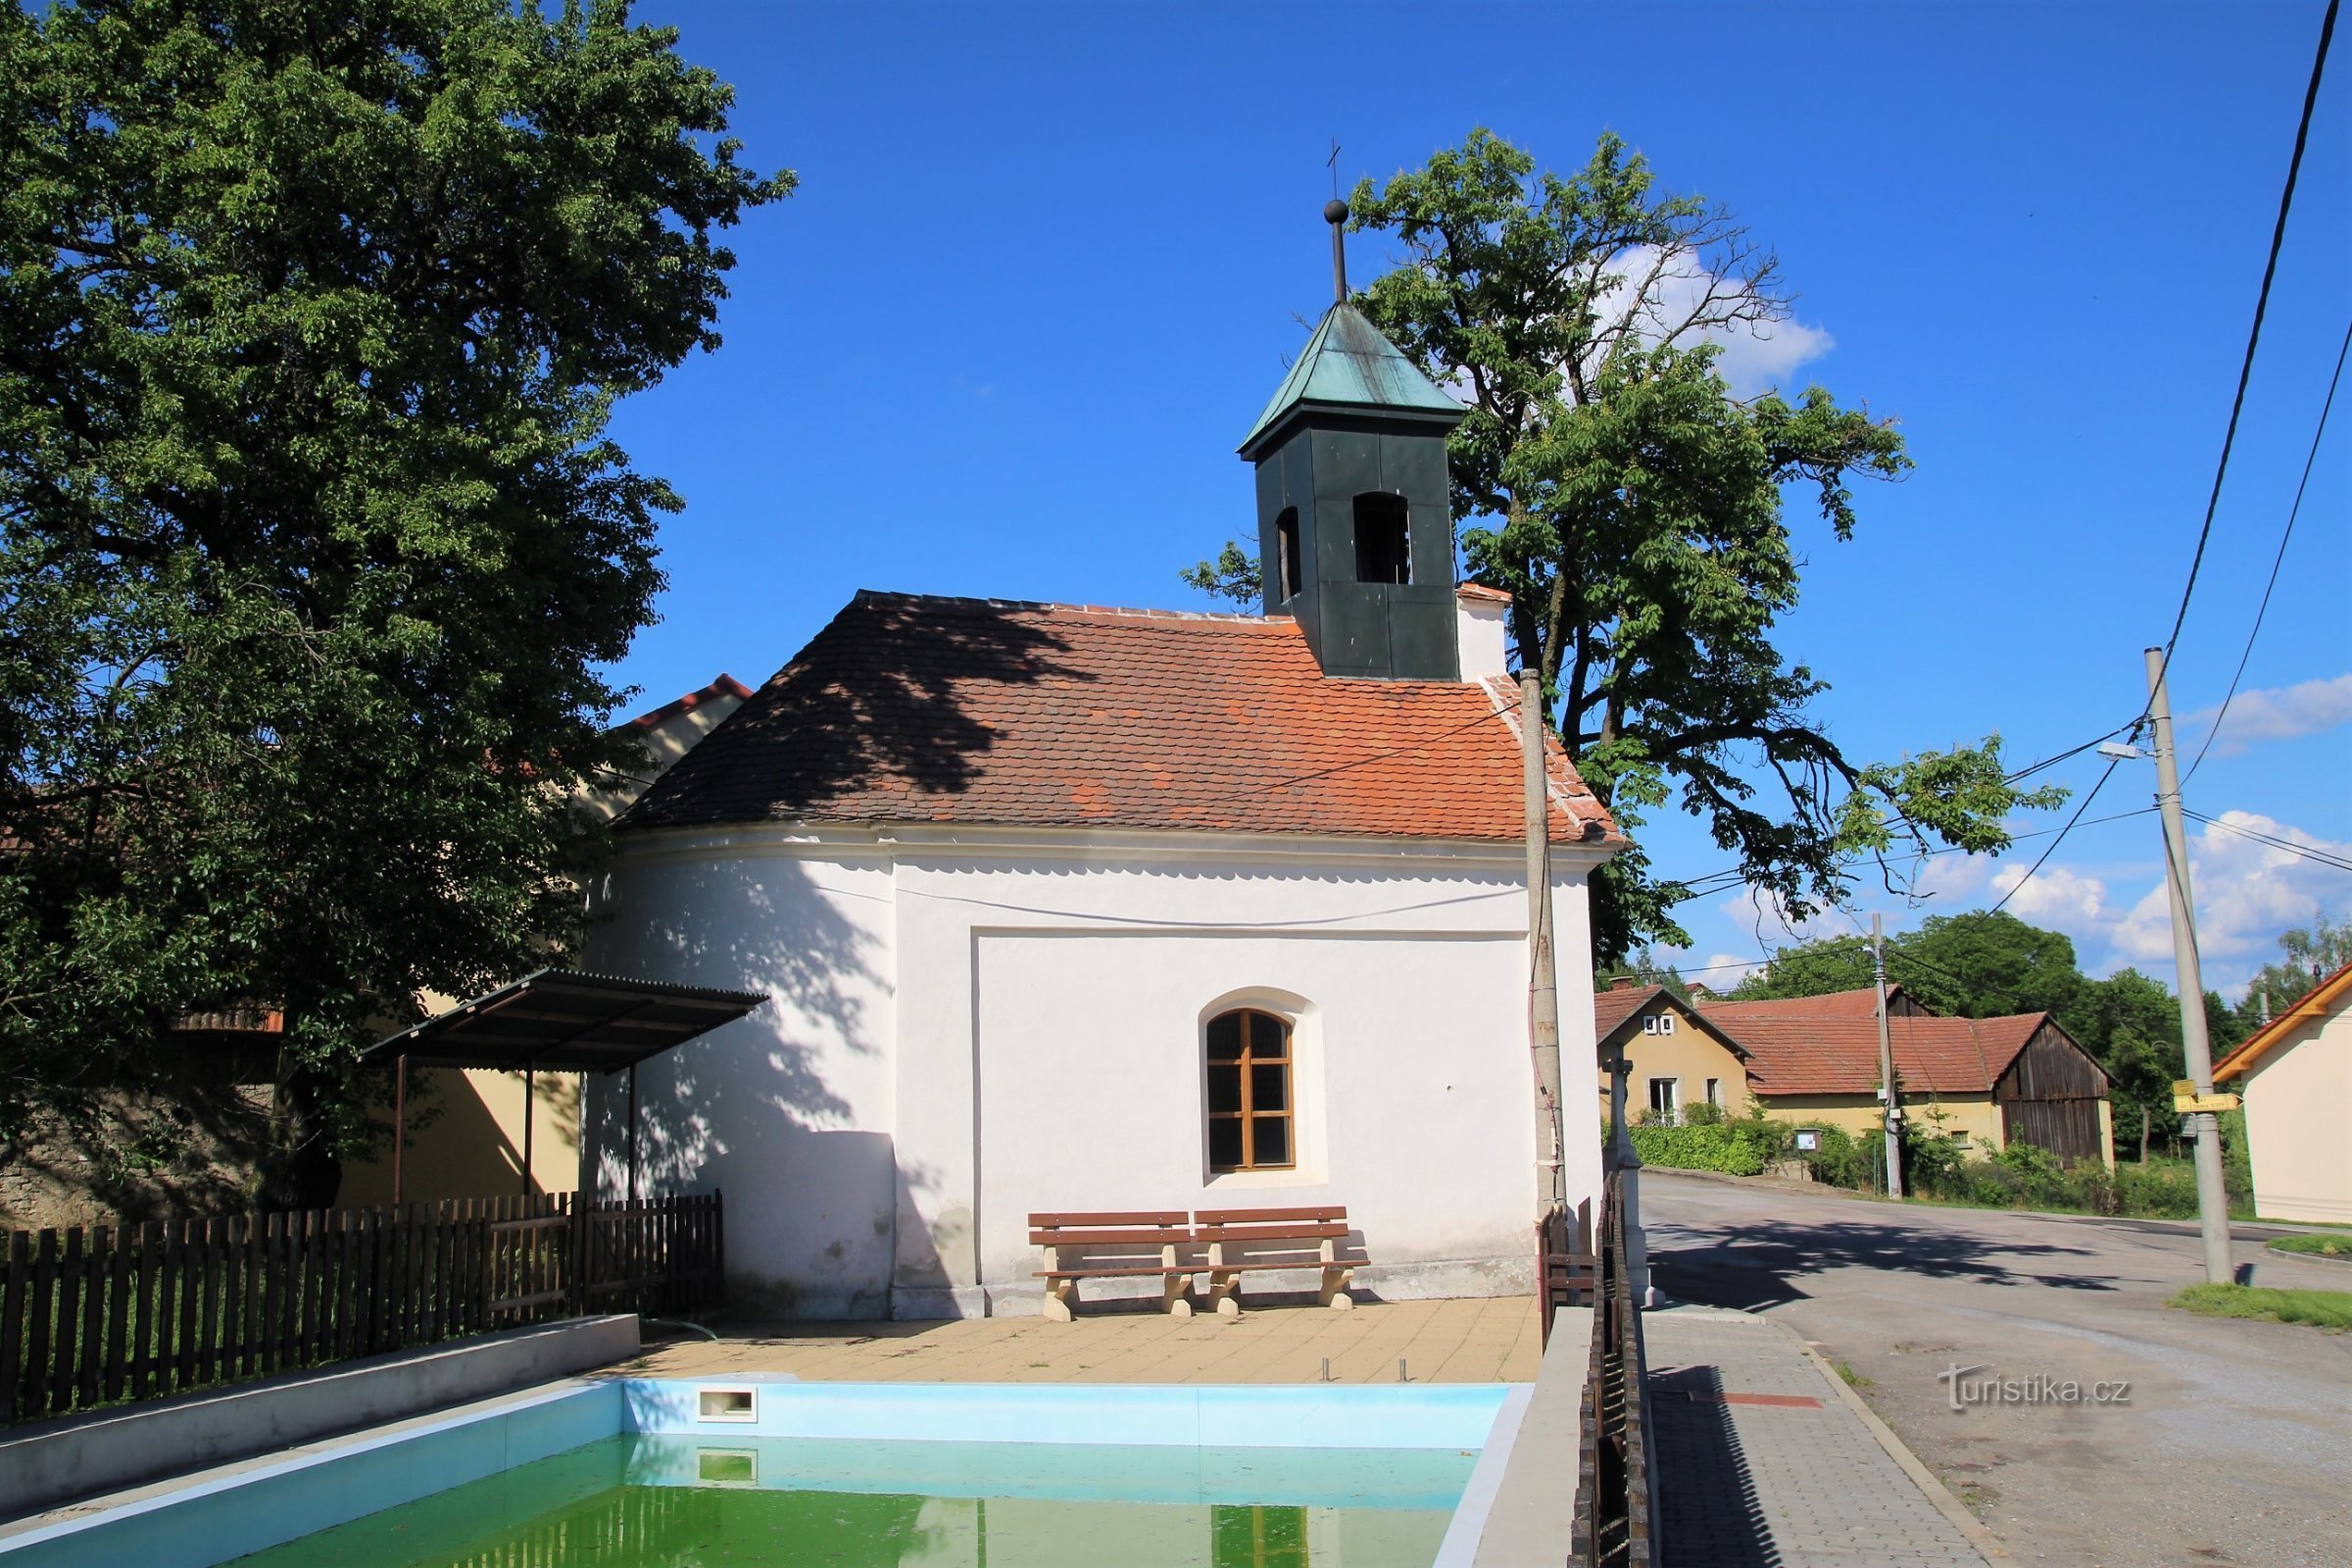 Chapel of the Assumption of the Virgin Mary in the village with a water tank